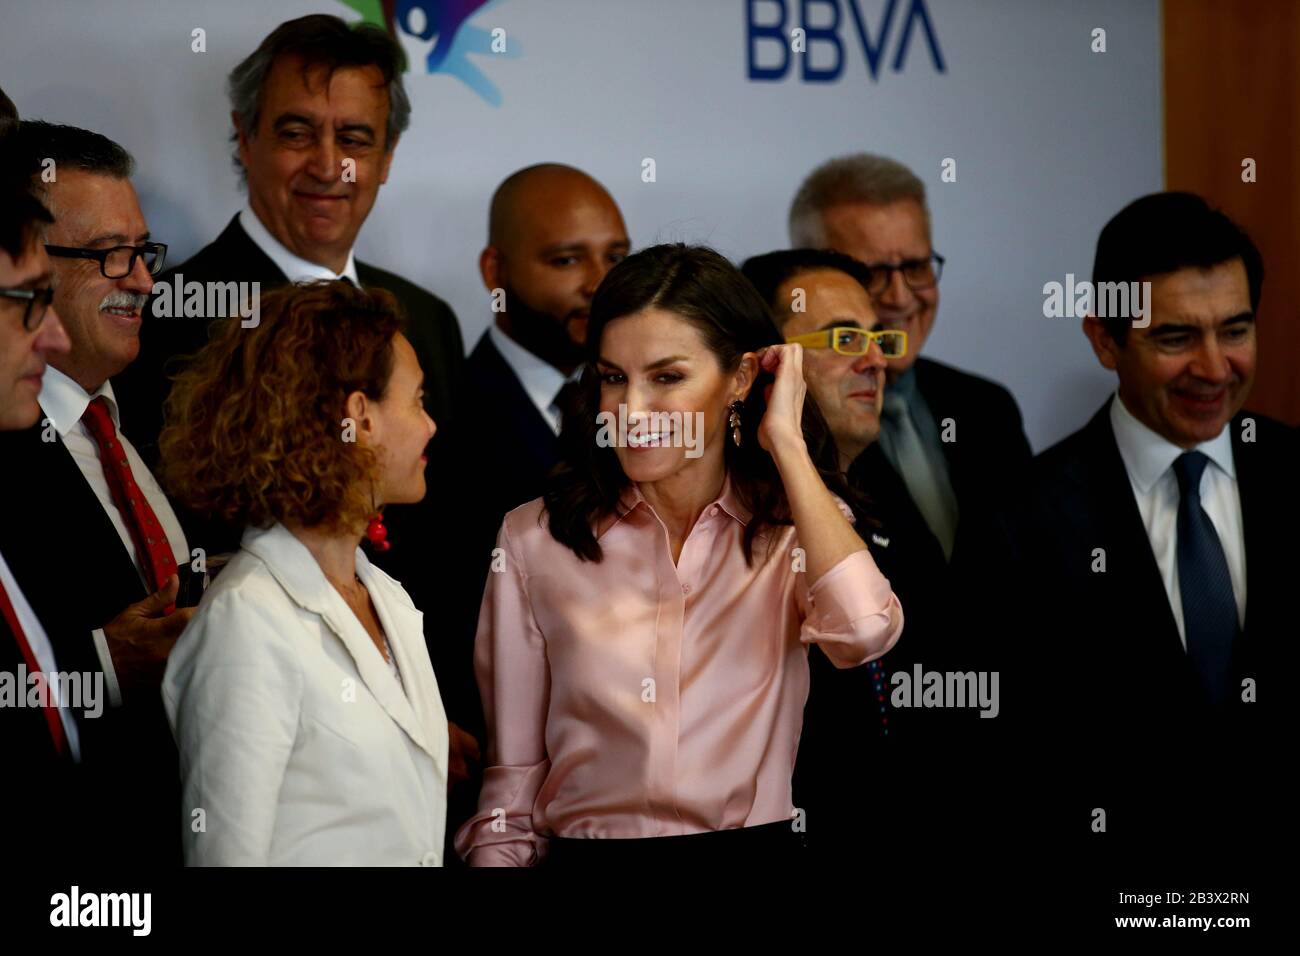 Madris, spain, 05/03/2020.- Queen Letizia and Meritxell Batet president of the Spanish parliament. president Queen of Spain Letizia, together with the Minister of Health, Salvador Illa, presides over the central act of World Rare Disease Day, which is celebrated with the motto 'Grow with you, our hope'. In the city of BBVA in Madrid with the assistance of the president of the Congress, Meritxell Batet; the Spanish Federation of Rare Diseases (Feder in Spanish), Juan Carrión, and that of BBVA, Carlos Torres. On Feder's 20th anniversary, the queen wanted to recognize the work of the 368 associat Stock Photo